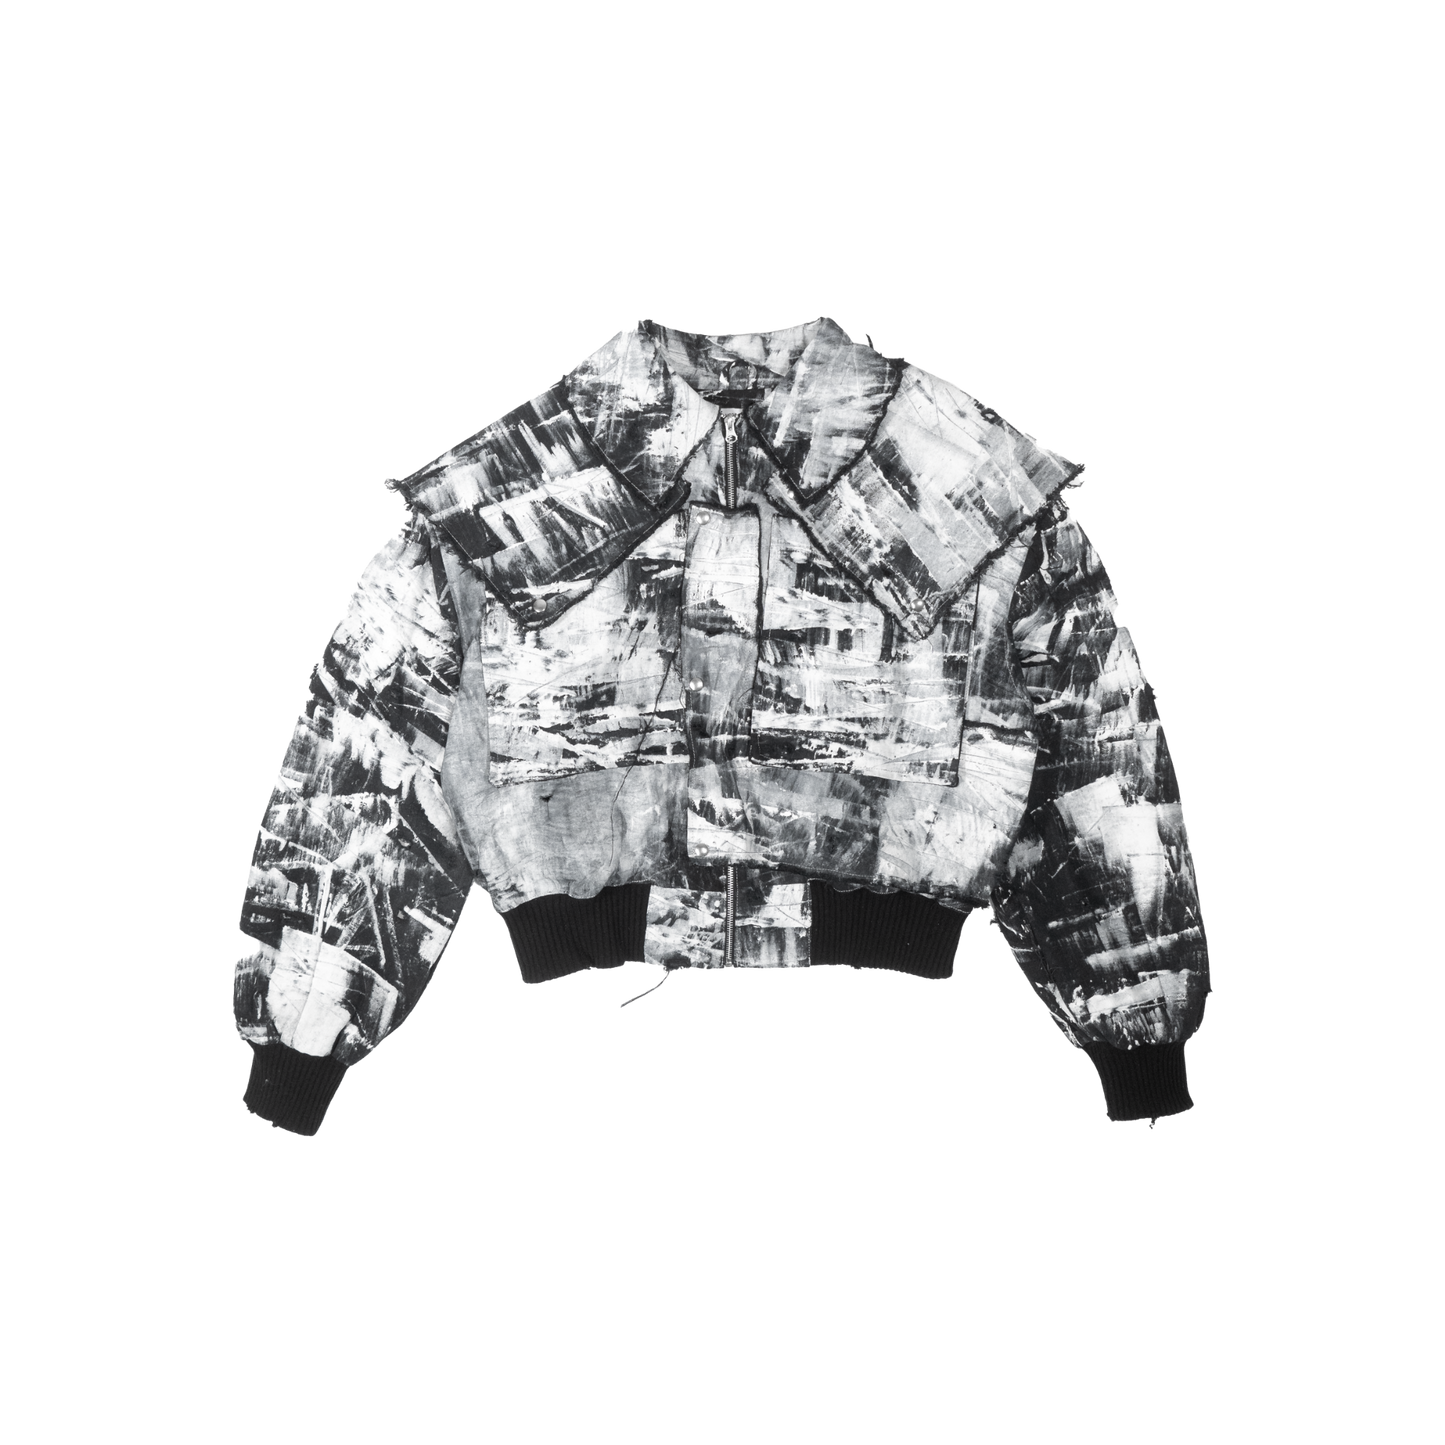 HAND-PAINTED BOMBER JACKET 1OF1